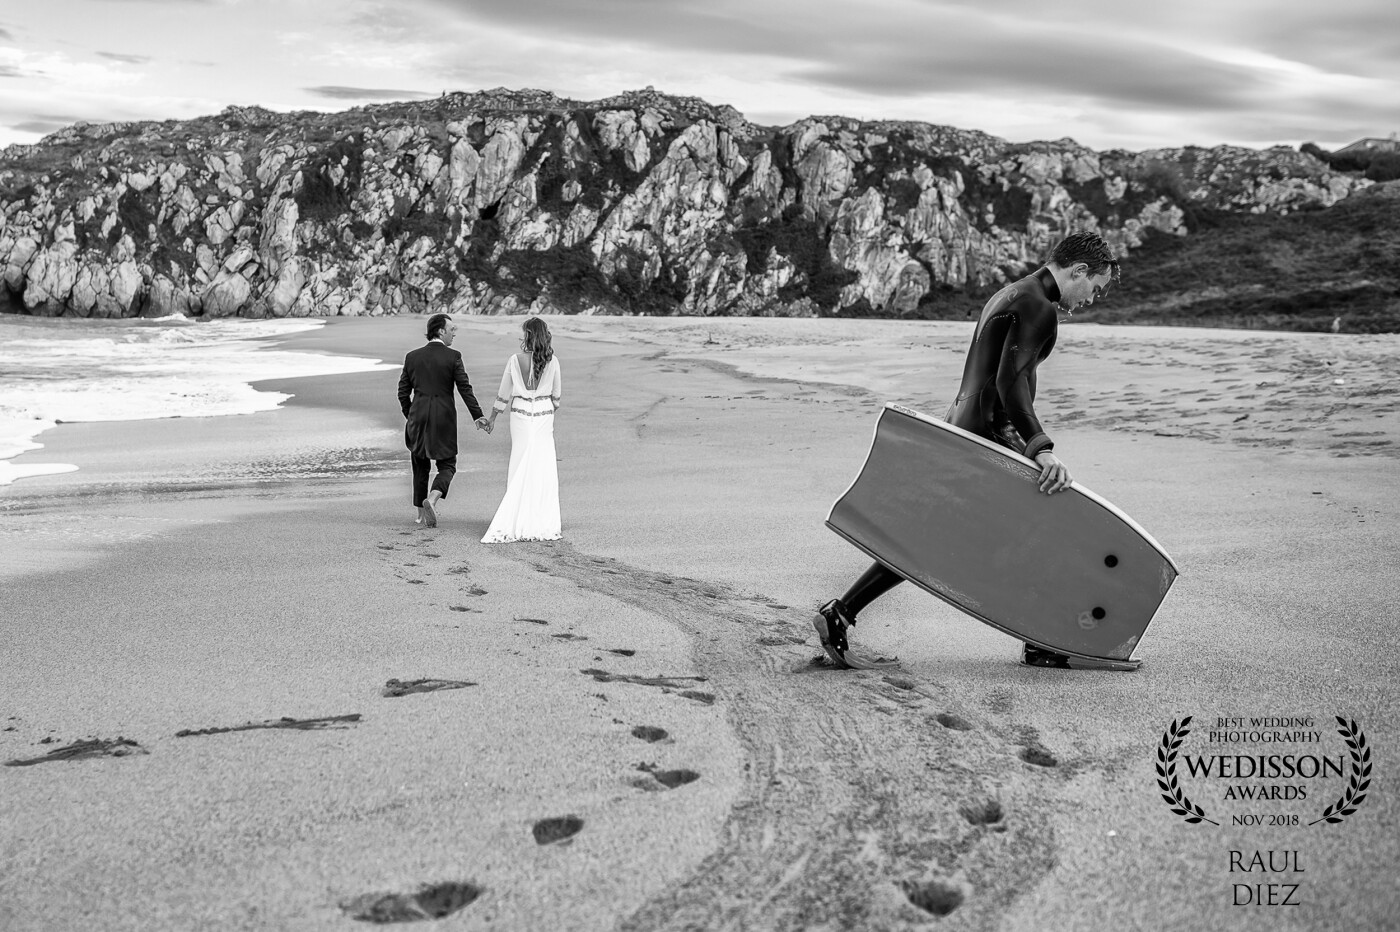 During the post-wedding of an amazing couple on a beach of surfers in the north of Spain. The beach is called Playa de Usgo in Cantabria, a place with lots of charm.